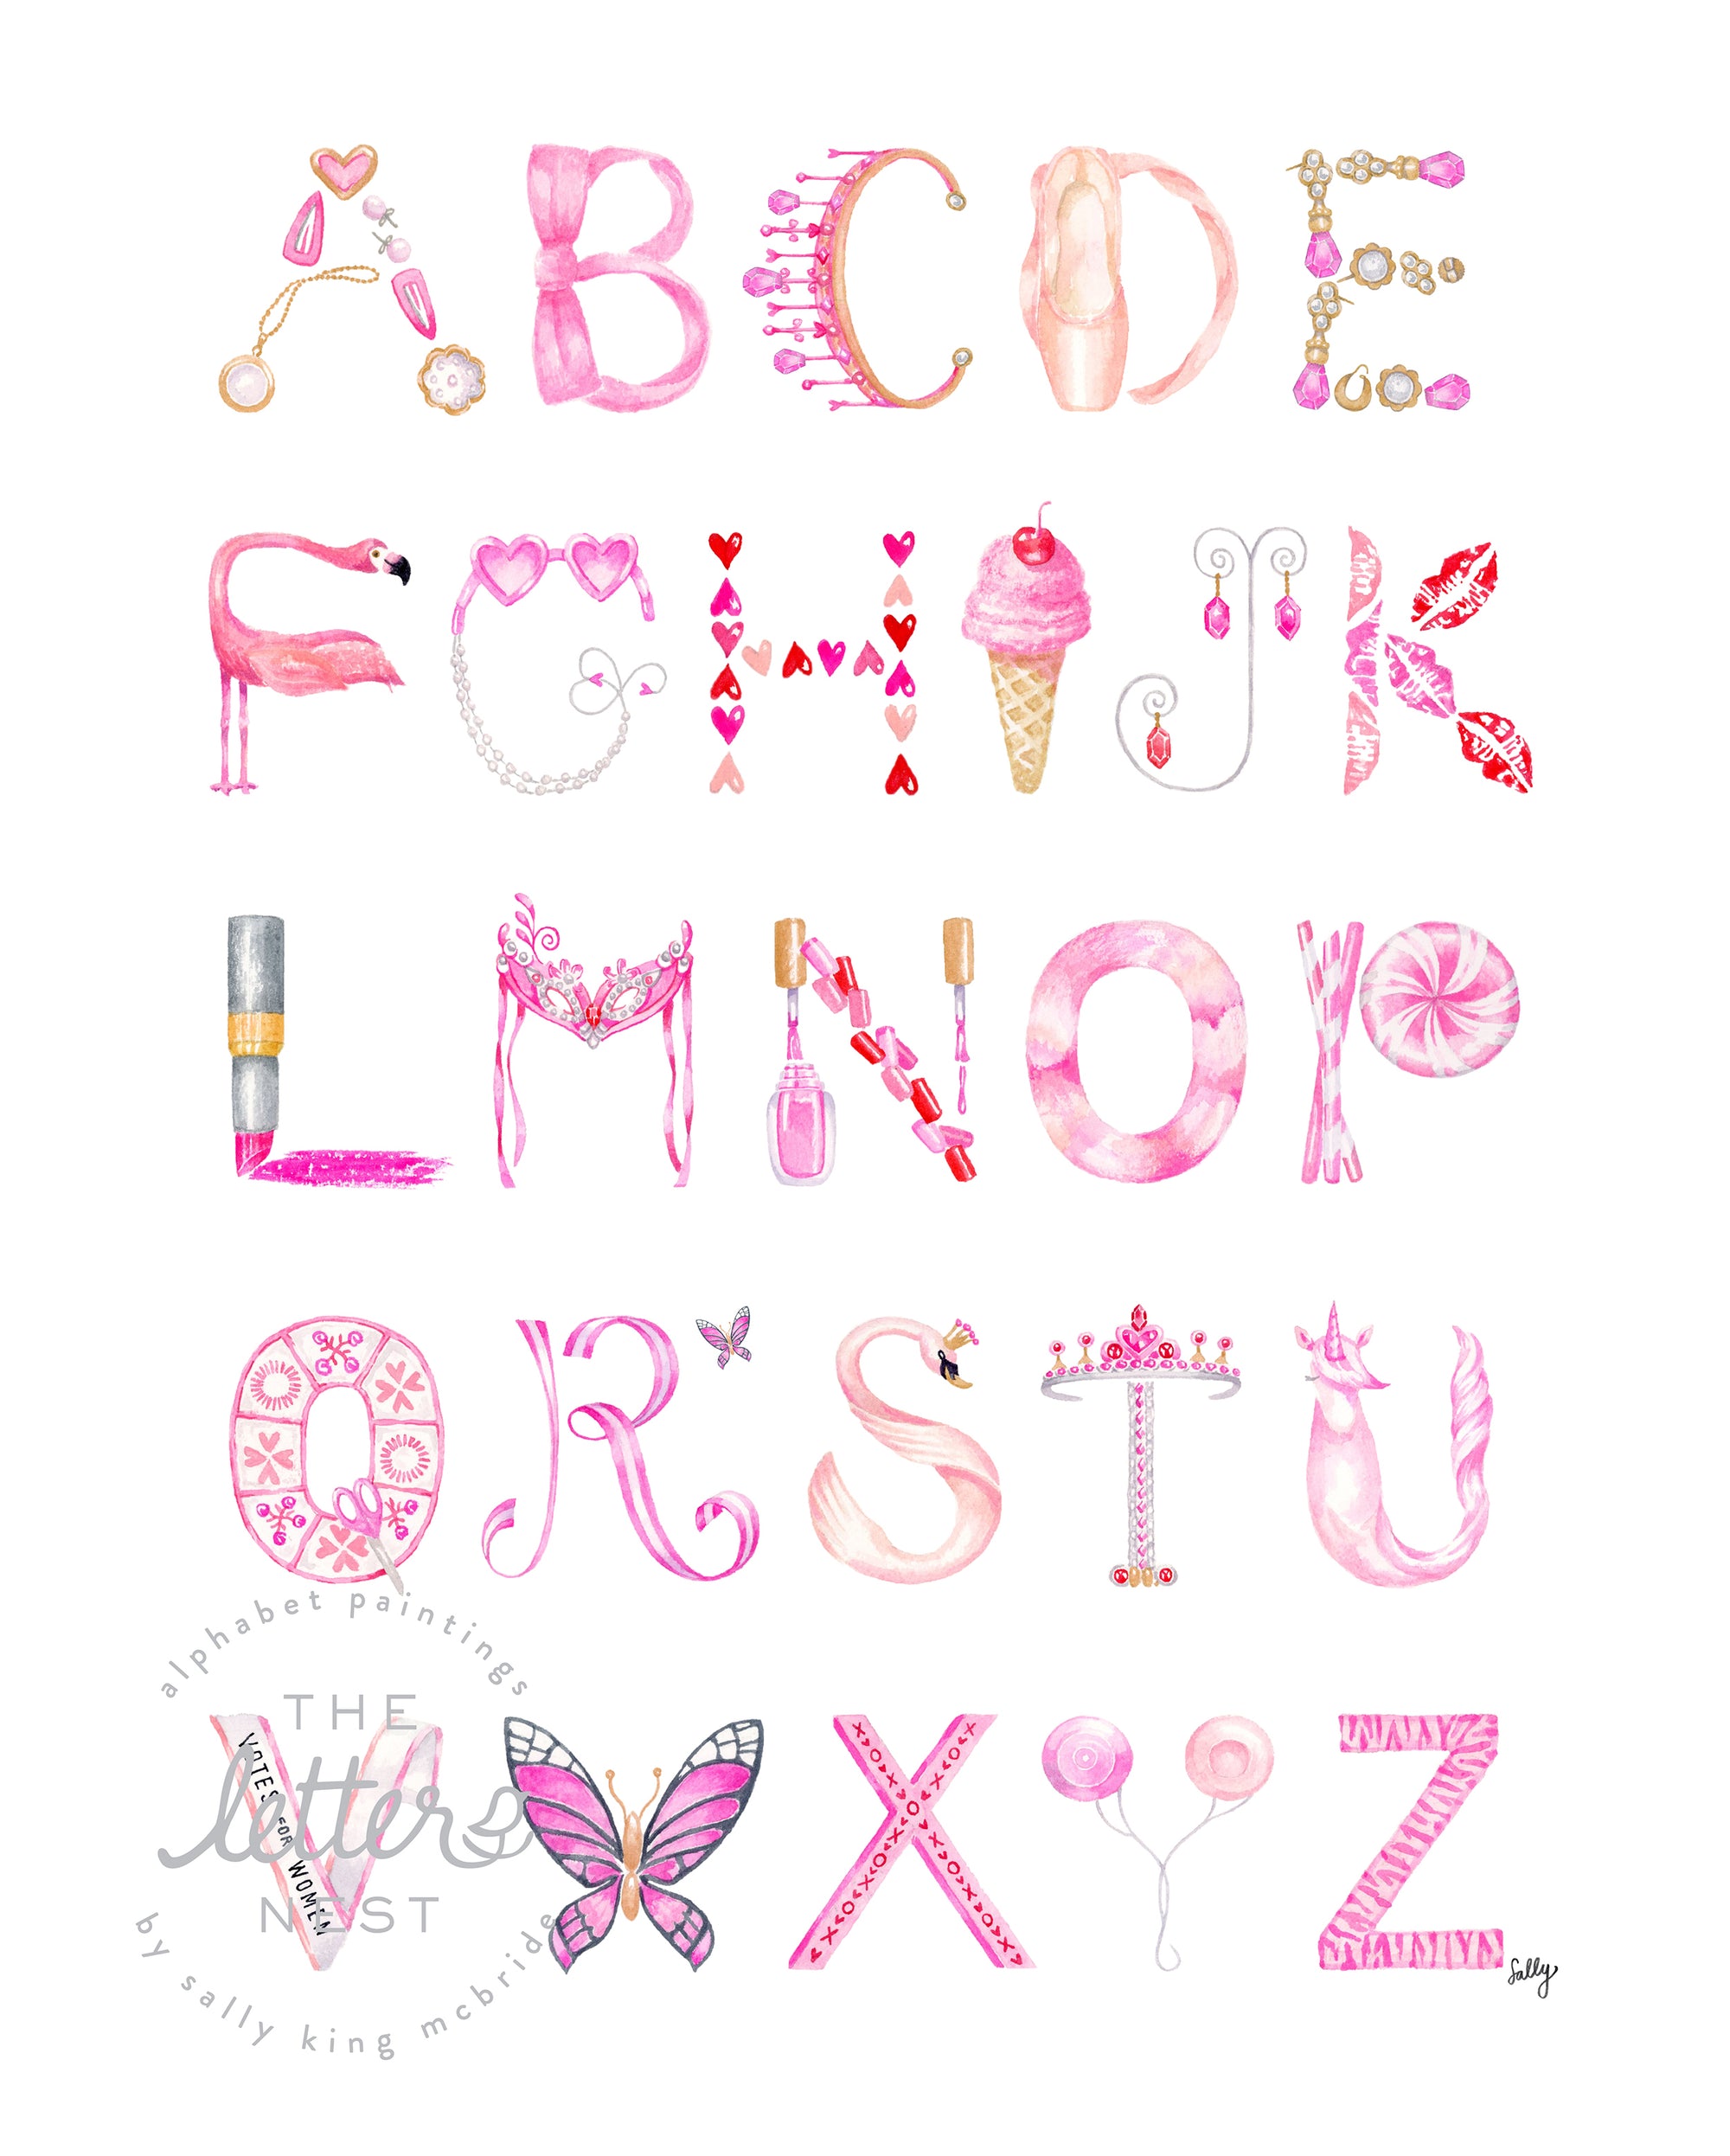 Watercolor Alphabet print featuring letters in shades of pink representing different objects inspired by the 21st-Century Girly-Girl